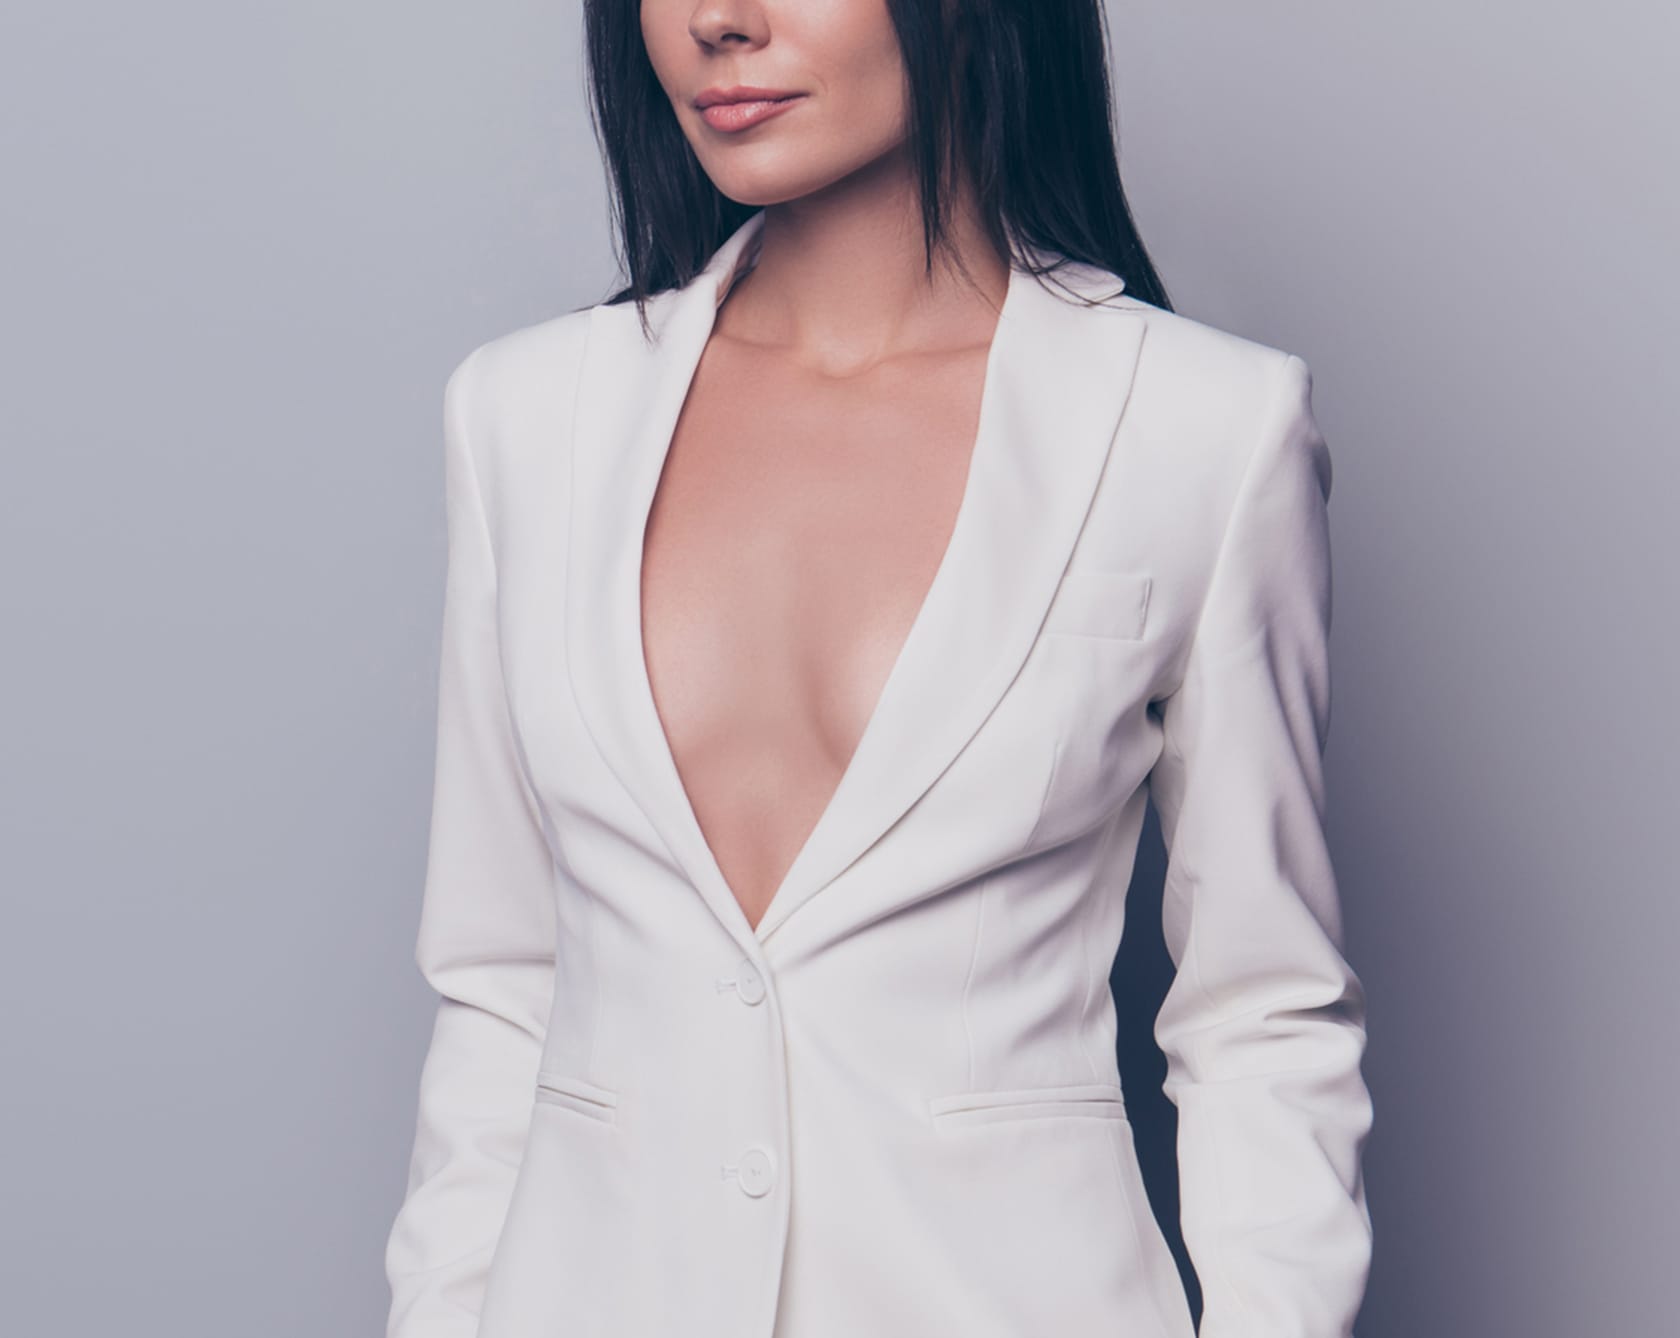 slim attractive woman in a white jacket with her upper chest exposed